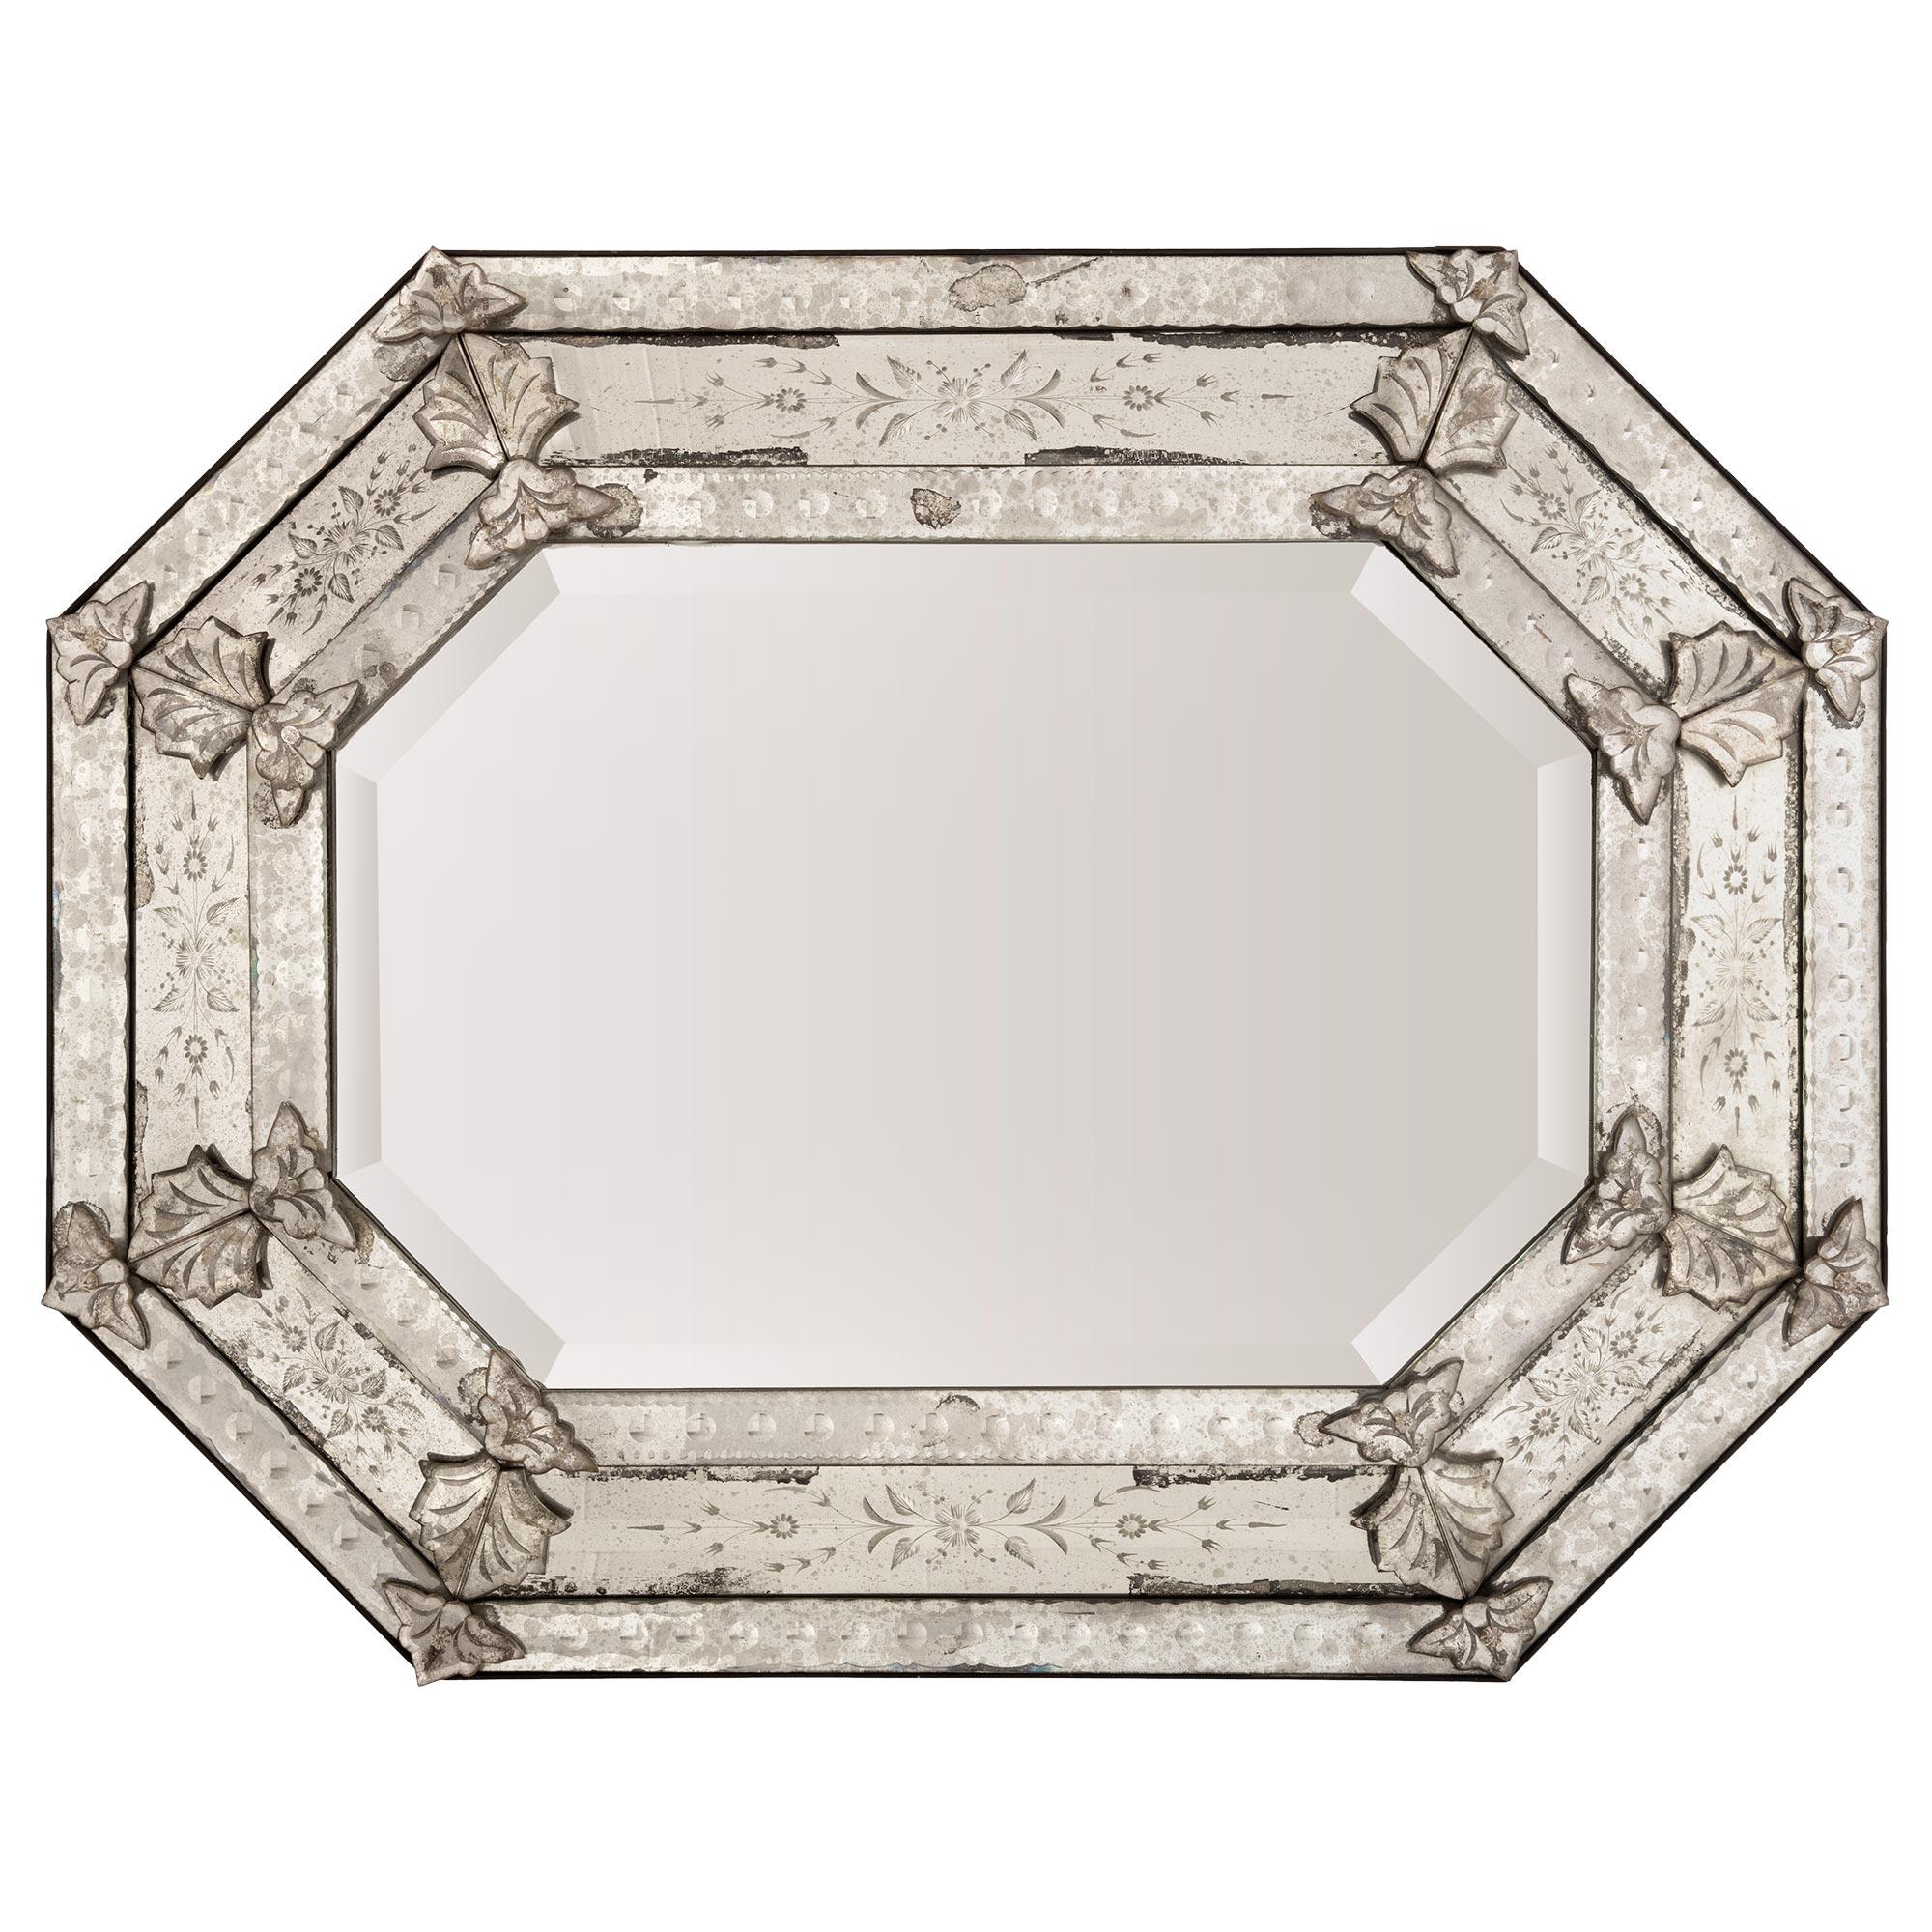 A striking Italian 19th century Venetian st. mirror. The octagonal mirror retains all of its original beautiful mirrored plates throughout with the central mirrored plate displaying a fine beveled border. The outer mirror plates display a most